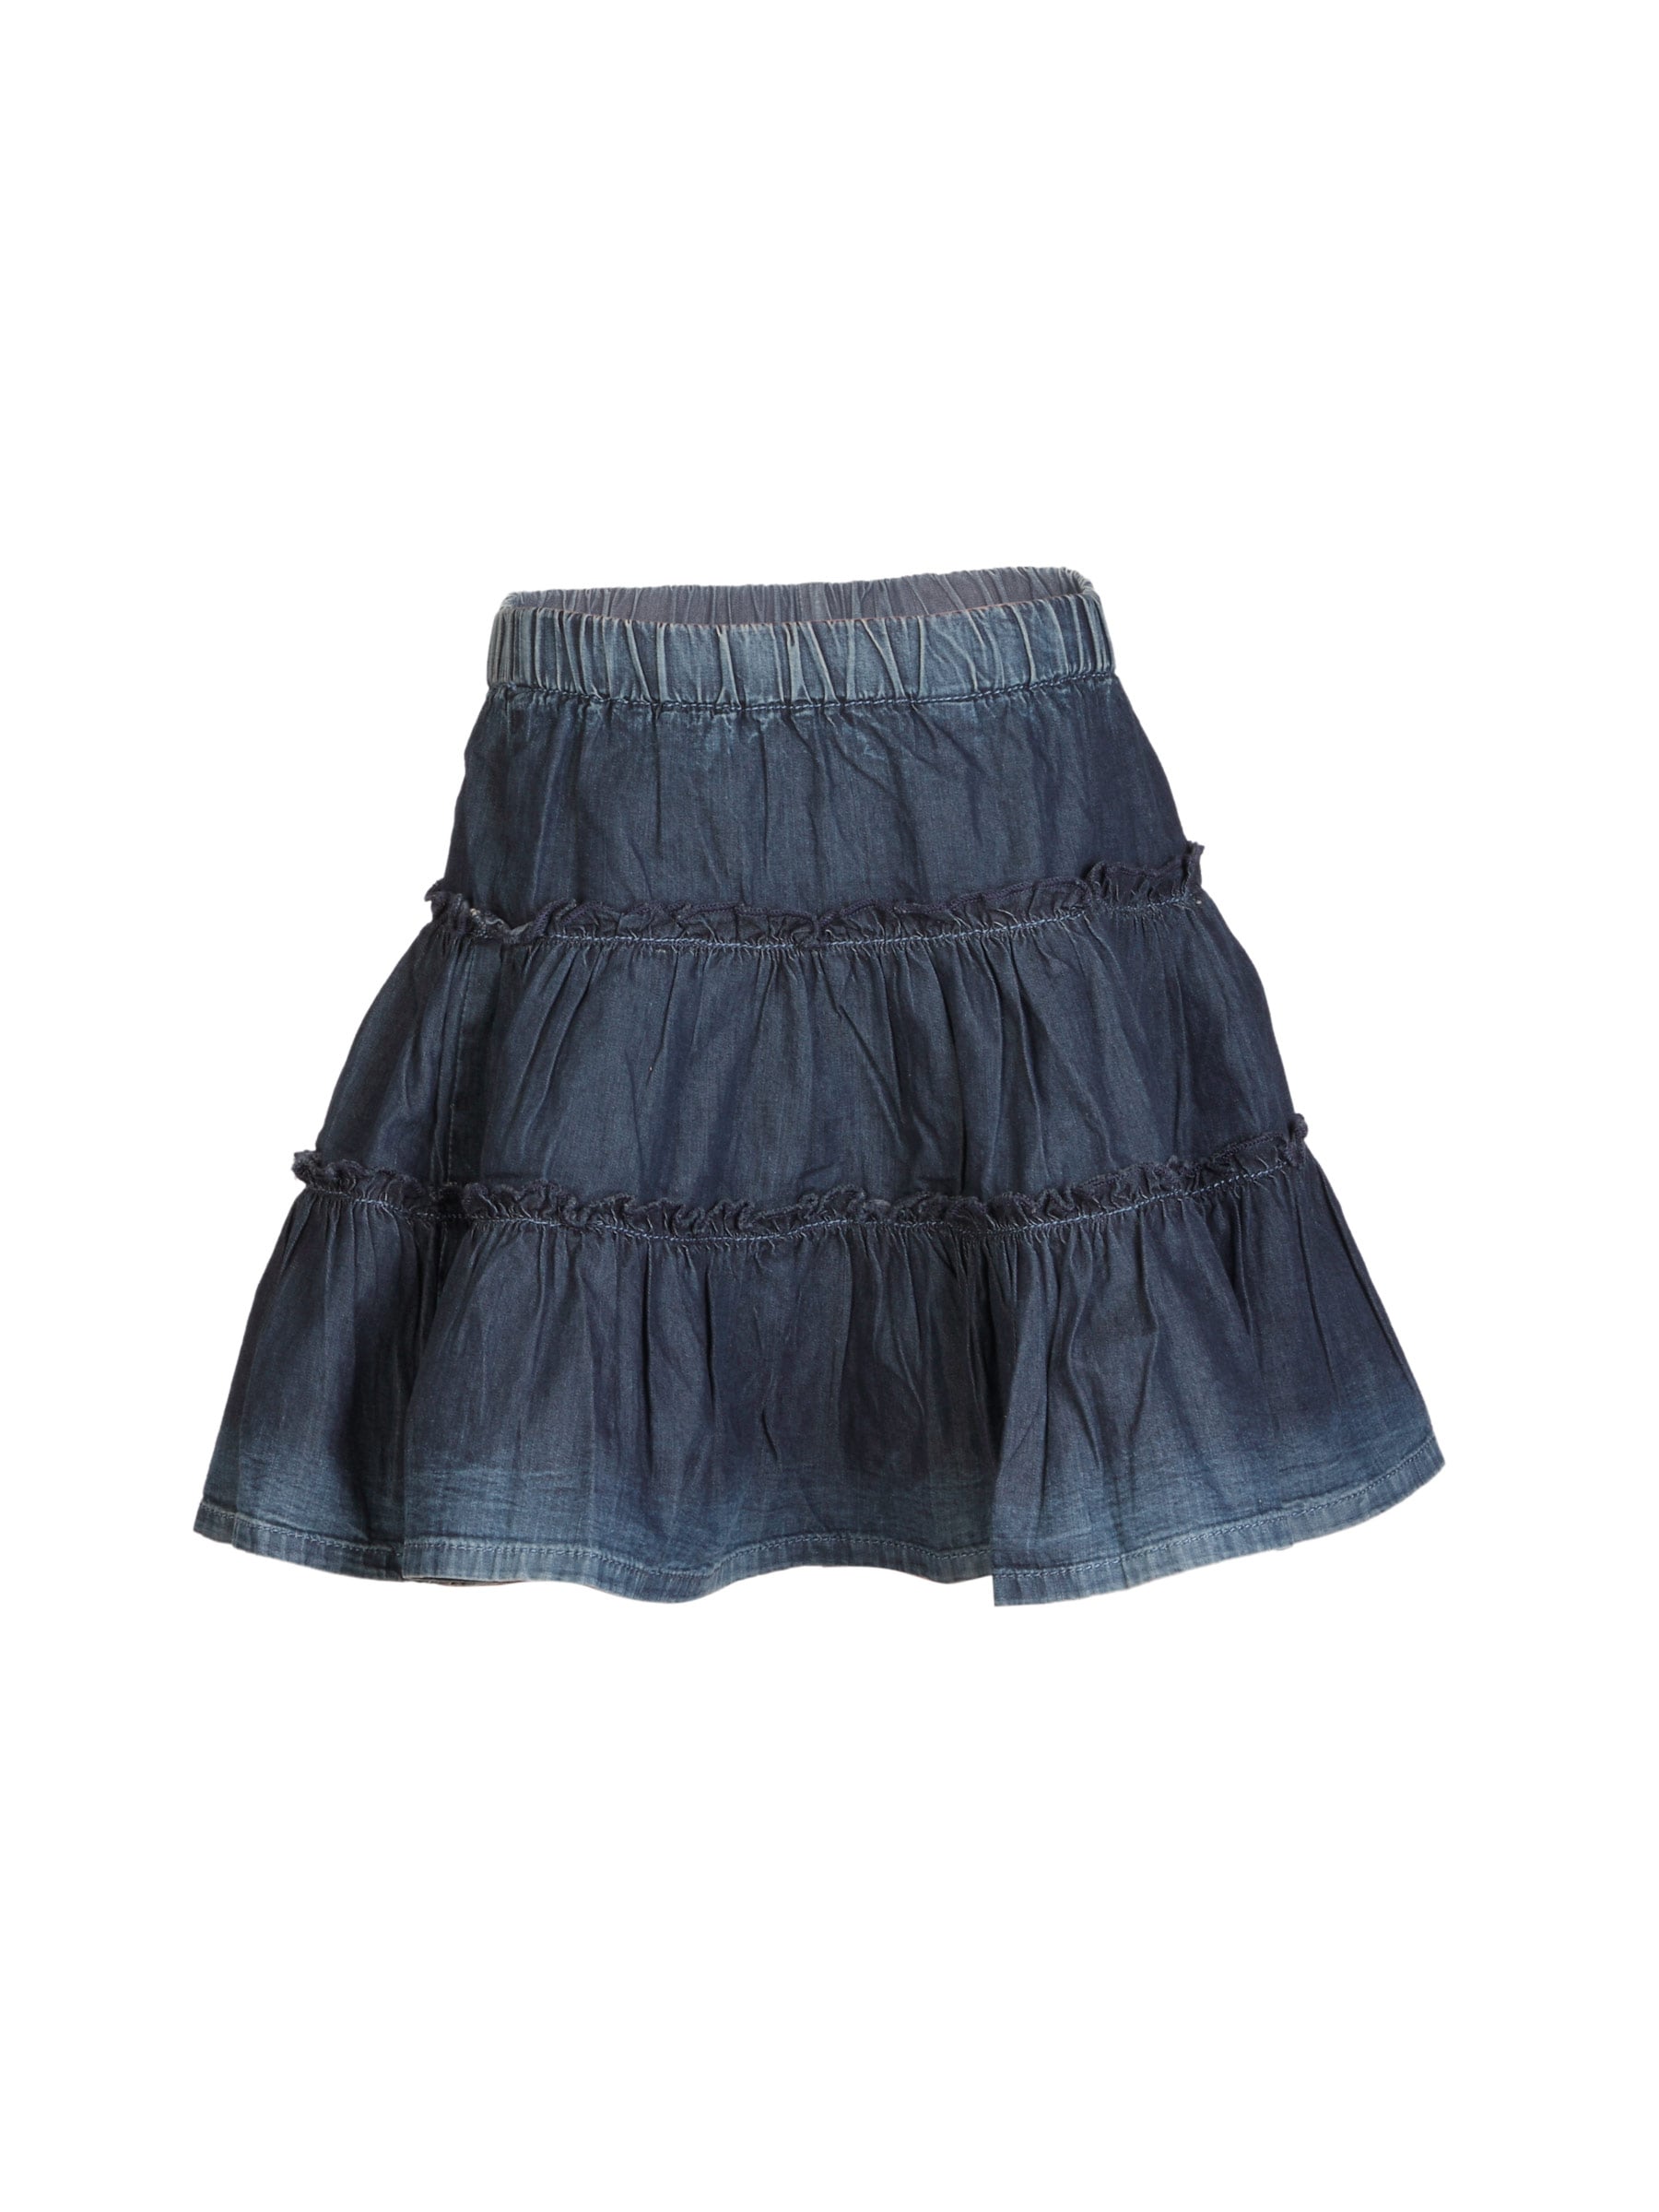 United Colors of Benetton Kids Girls Washed Blue Skirt